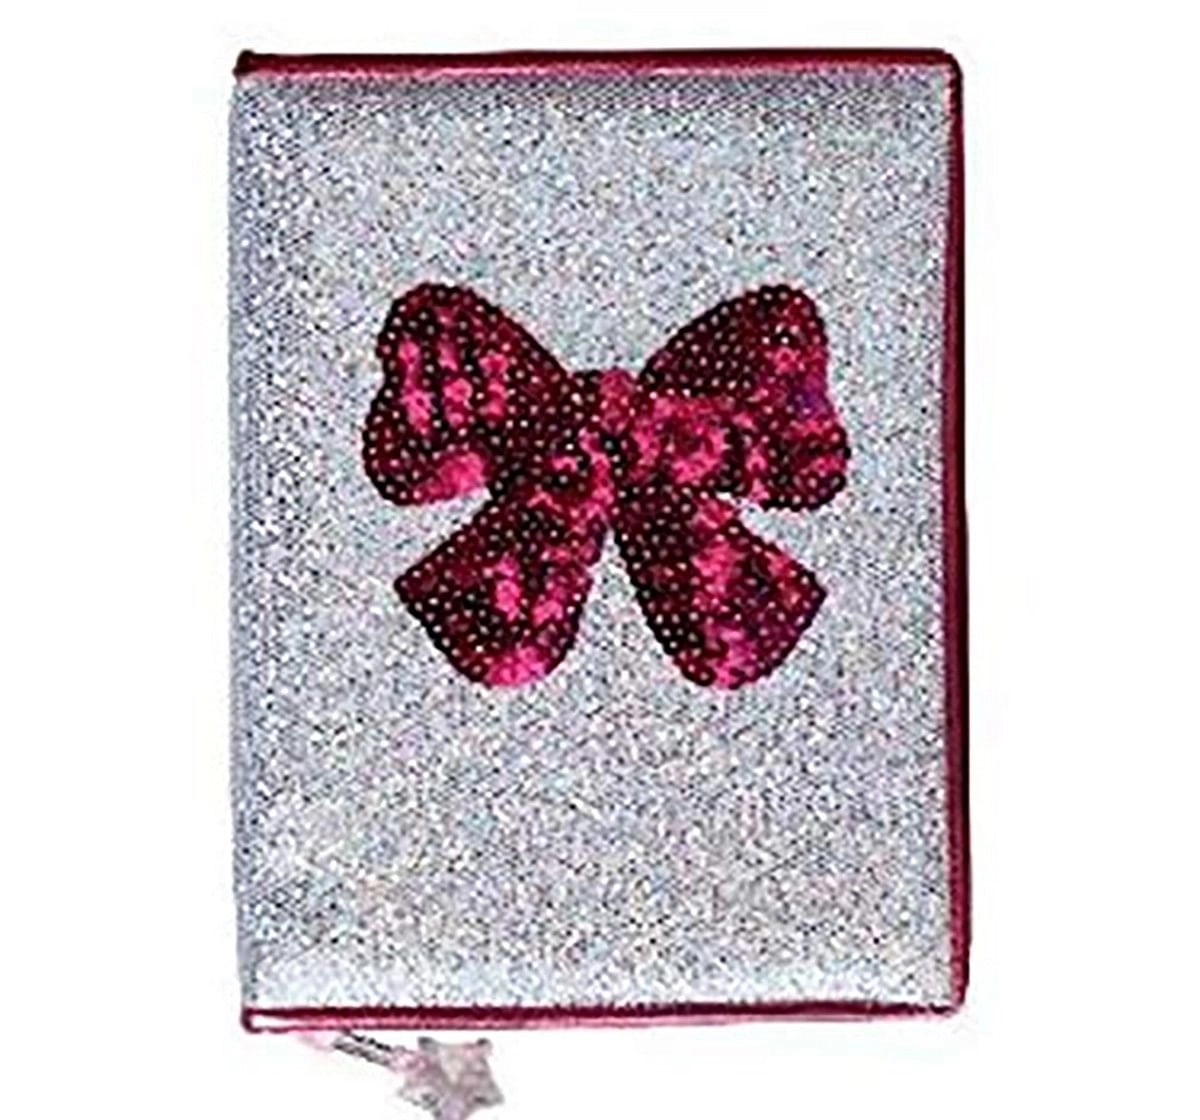  Mirada Bow With Glitter  Notebook - Study & Desk Accessories for Kids age 3Y+ (Silver)